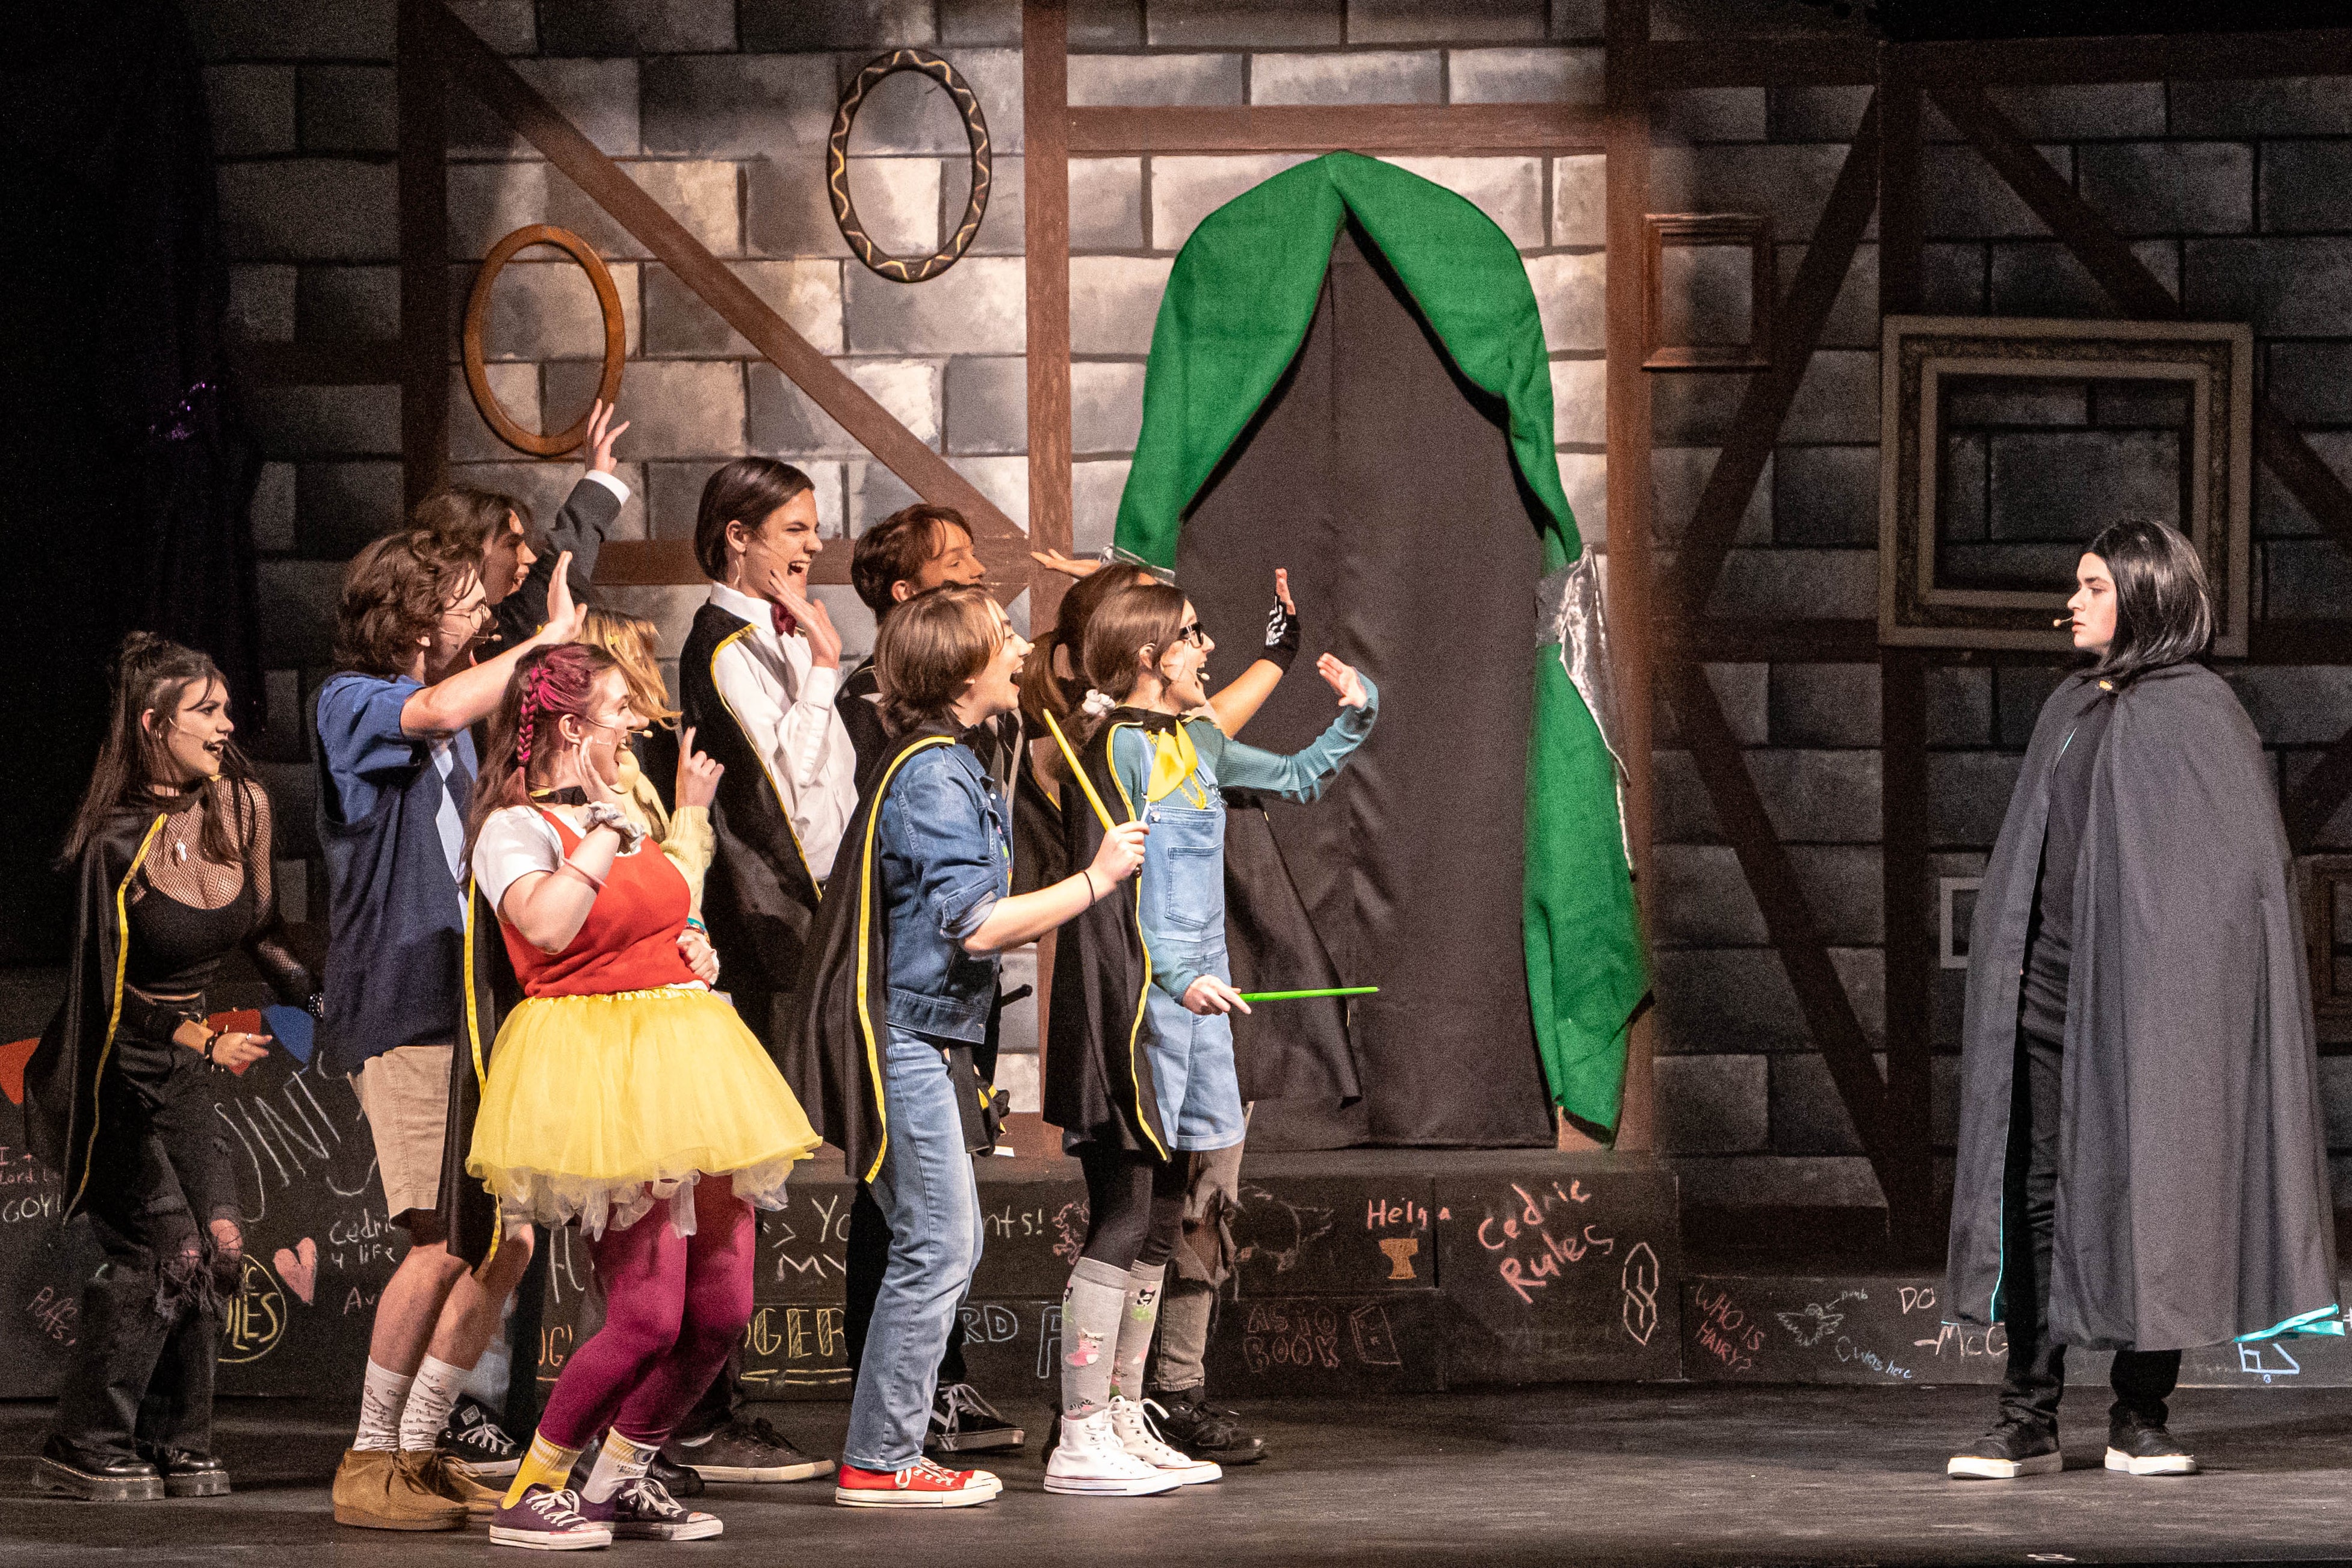 On a stage, a number of kids dressed in silly fashion raise their hands in Potions class.